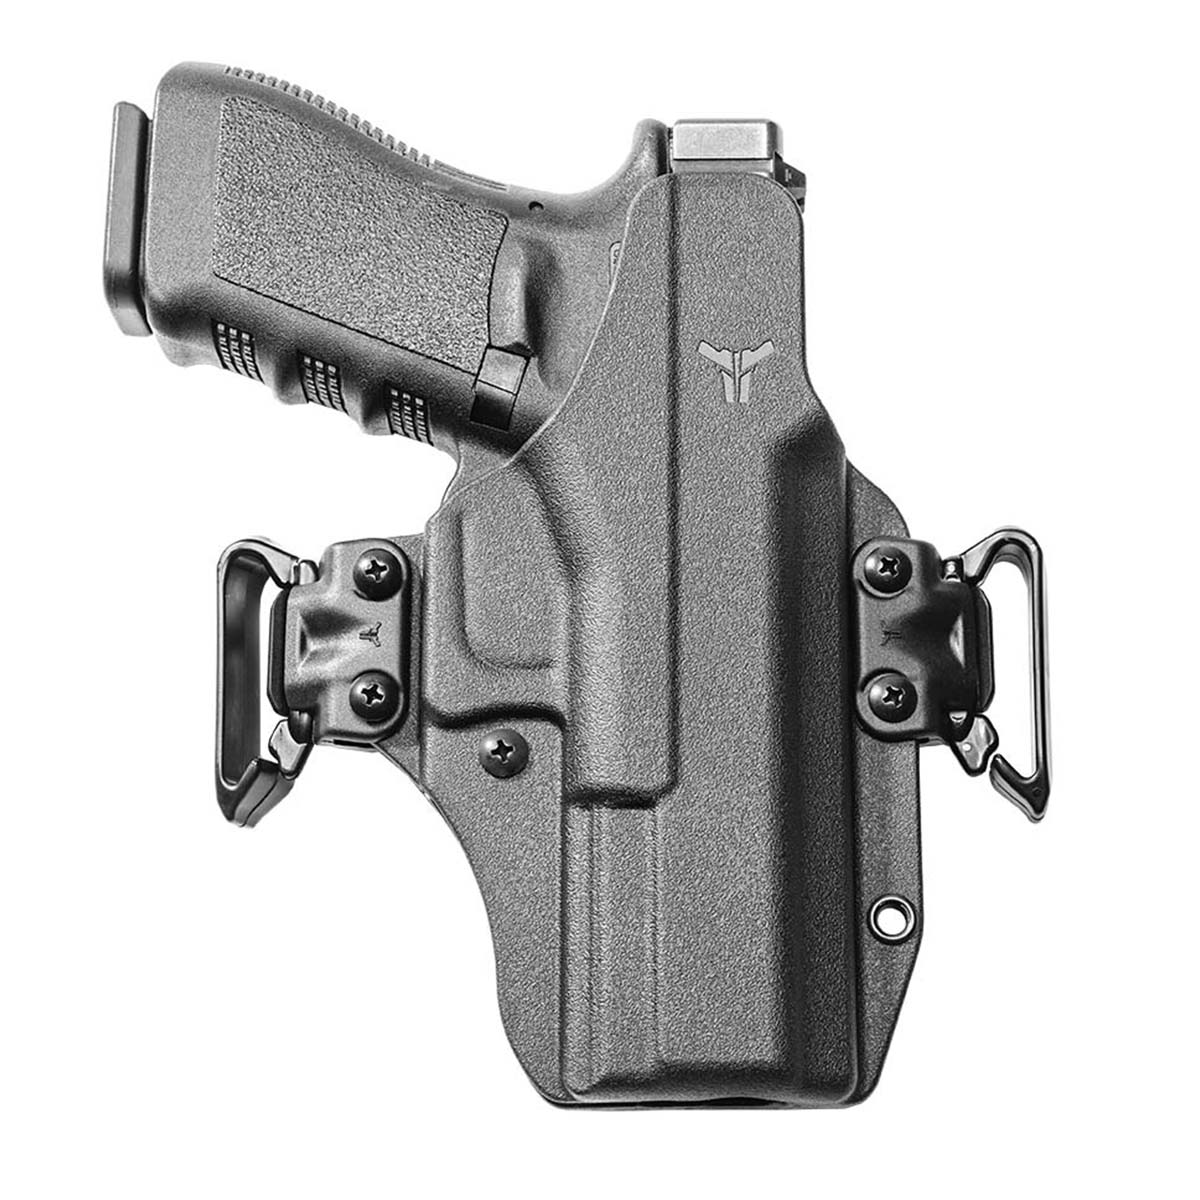 Taurus - Millennium G2C - Small of the Back Carry - Single Clip - Hidden  Hybrid Holsters